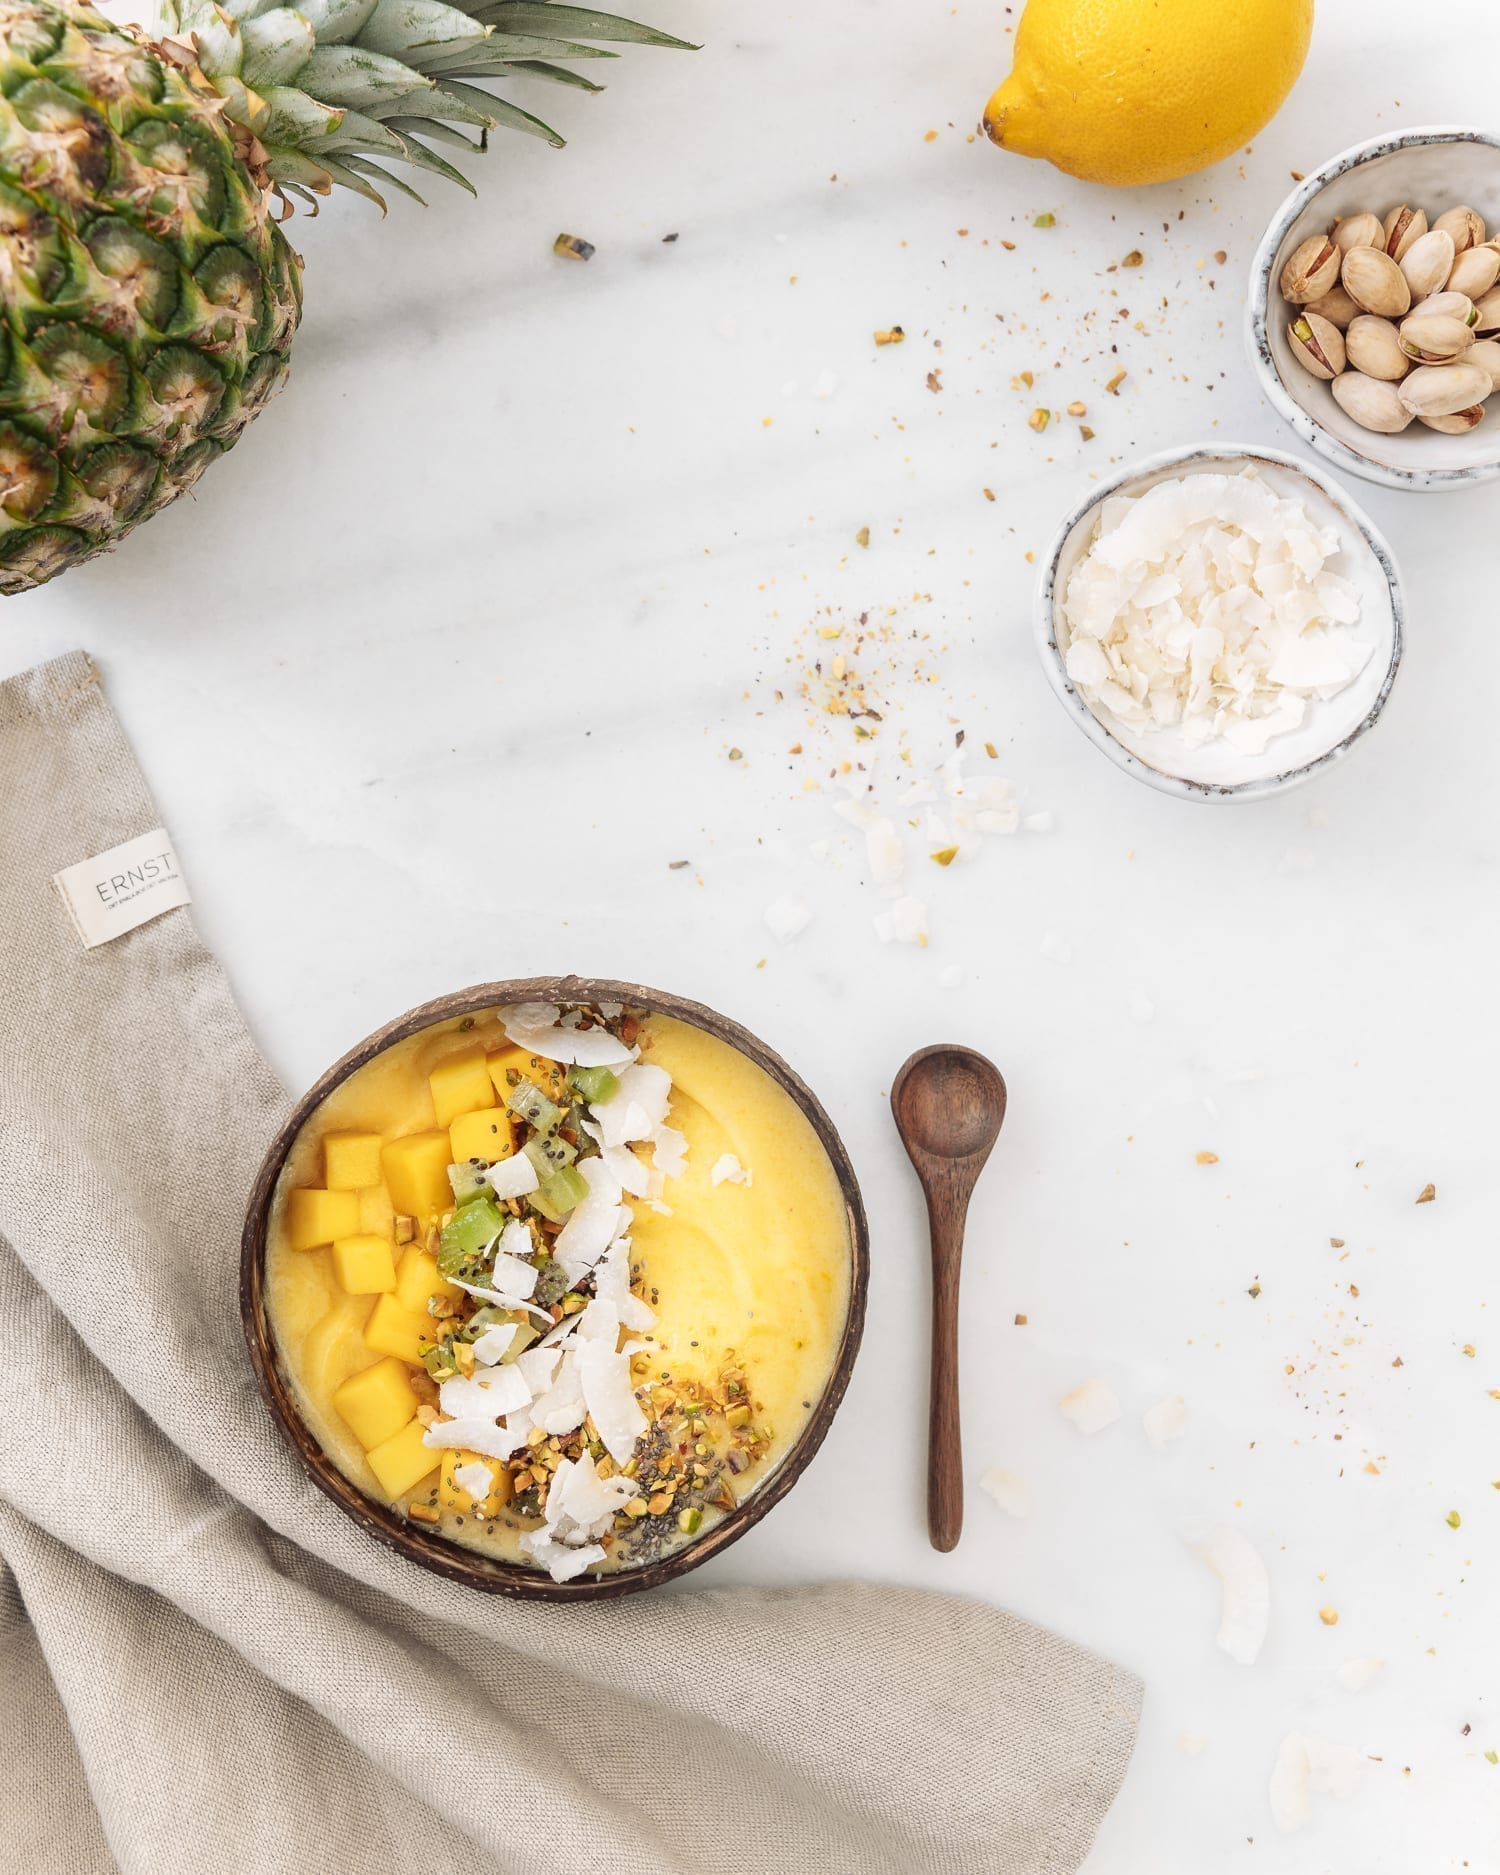 Recipe: Tropical Smoothie Bowl with Pineapple, Mango & Coconut